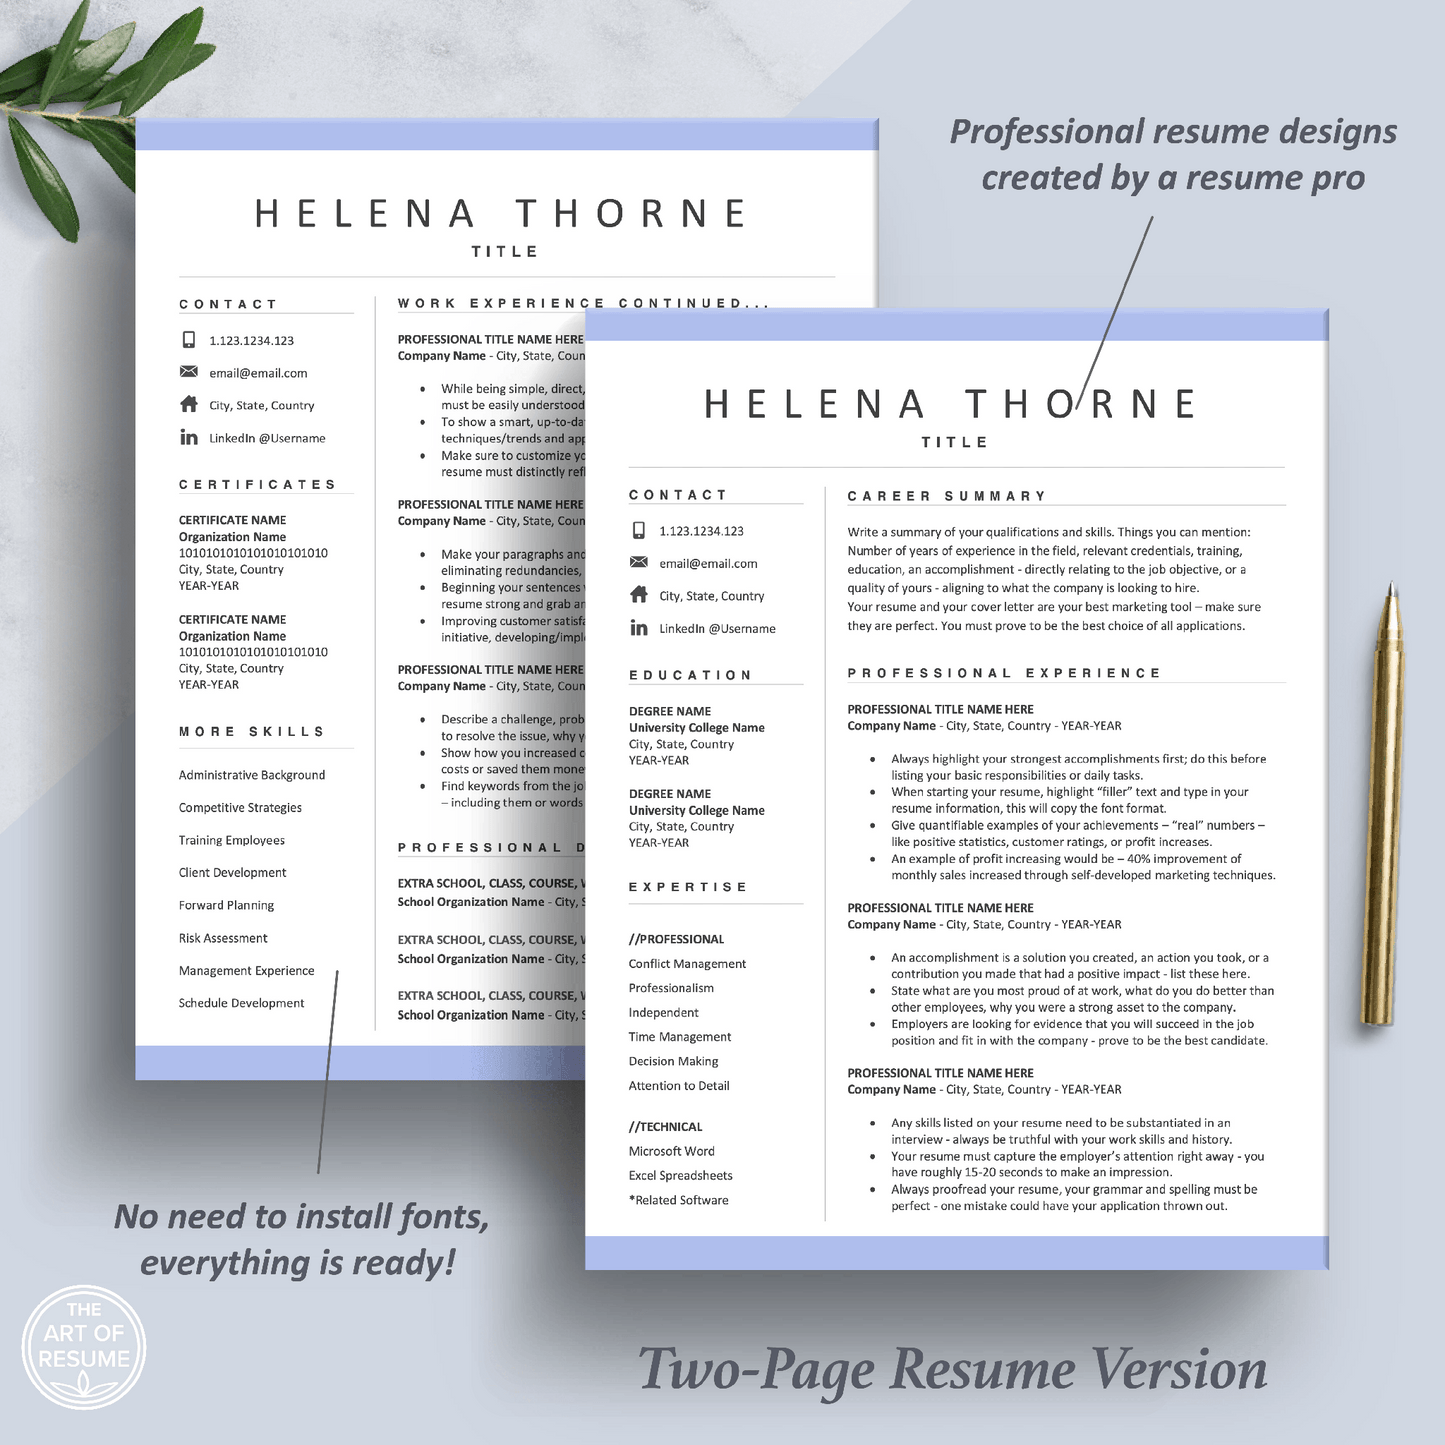 The Art of Resume Templates | Two Page Professional Executive Resume CV Template | Curriculum Vitae